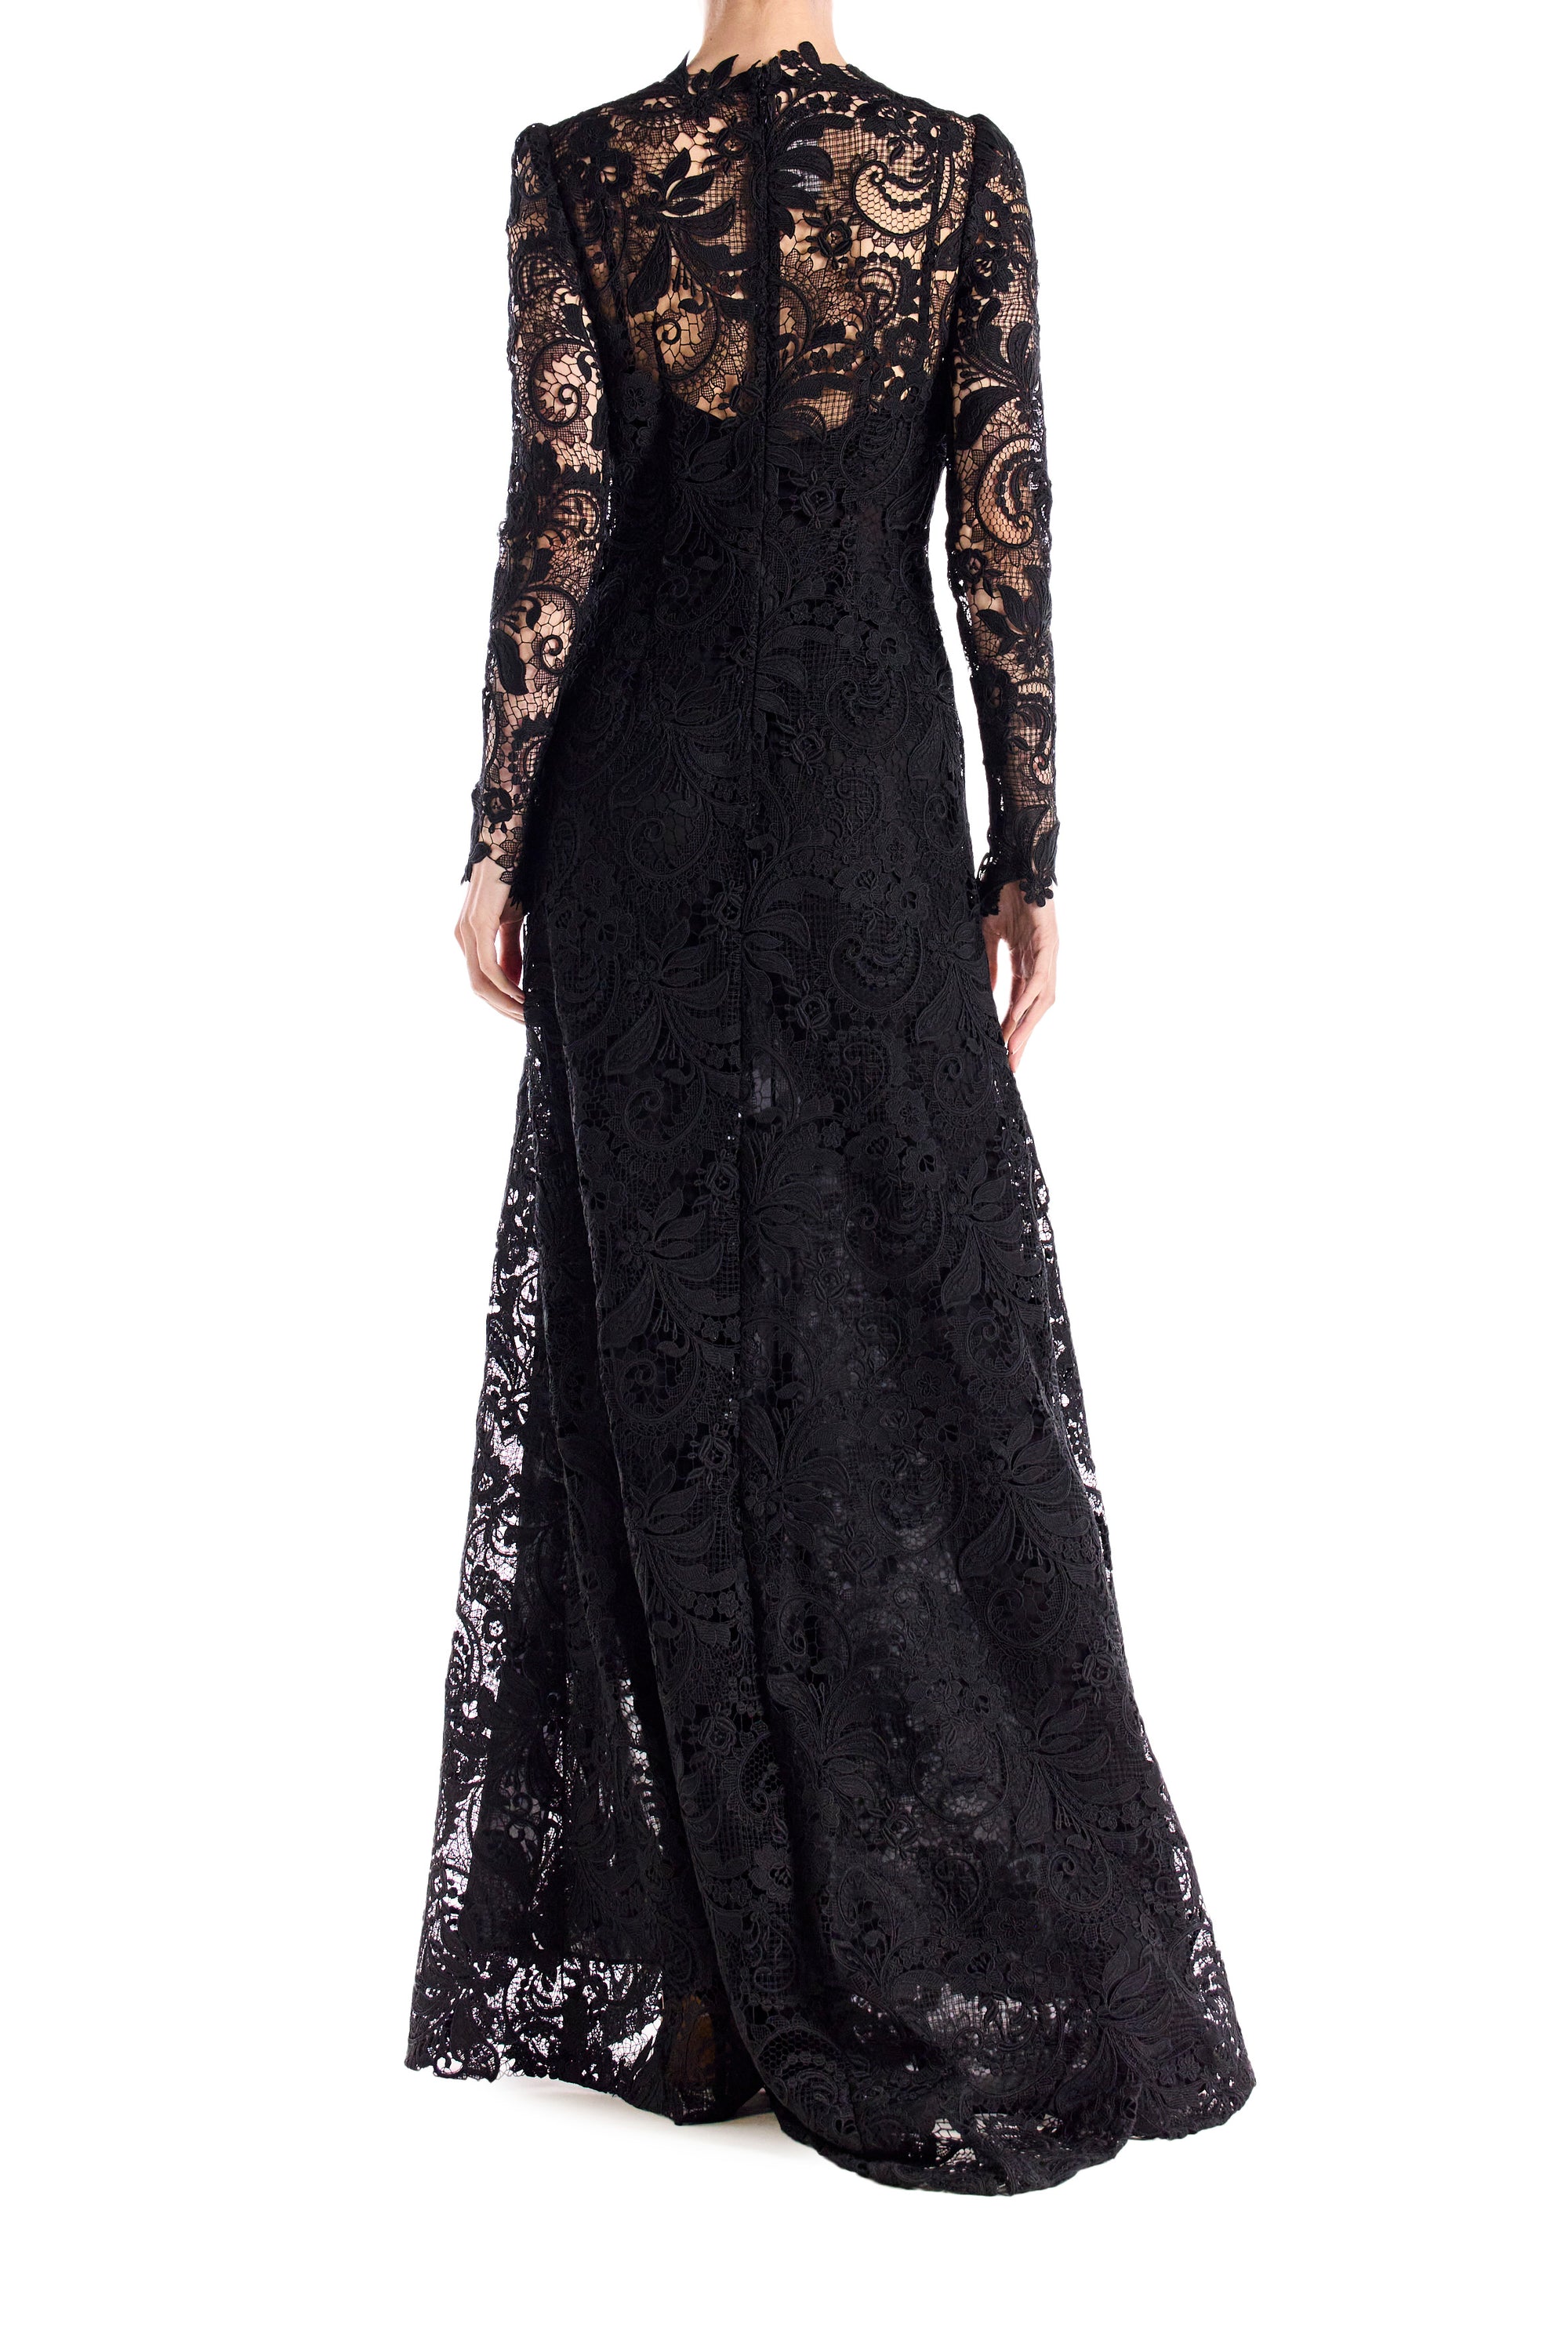 Monique Lhuillier long sleeve black lace gown with v-neck and high leg slit.